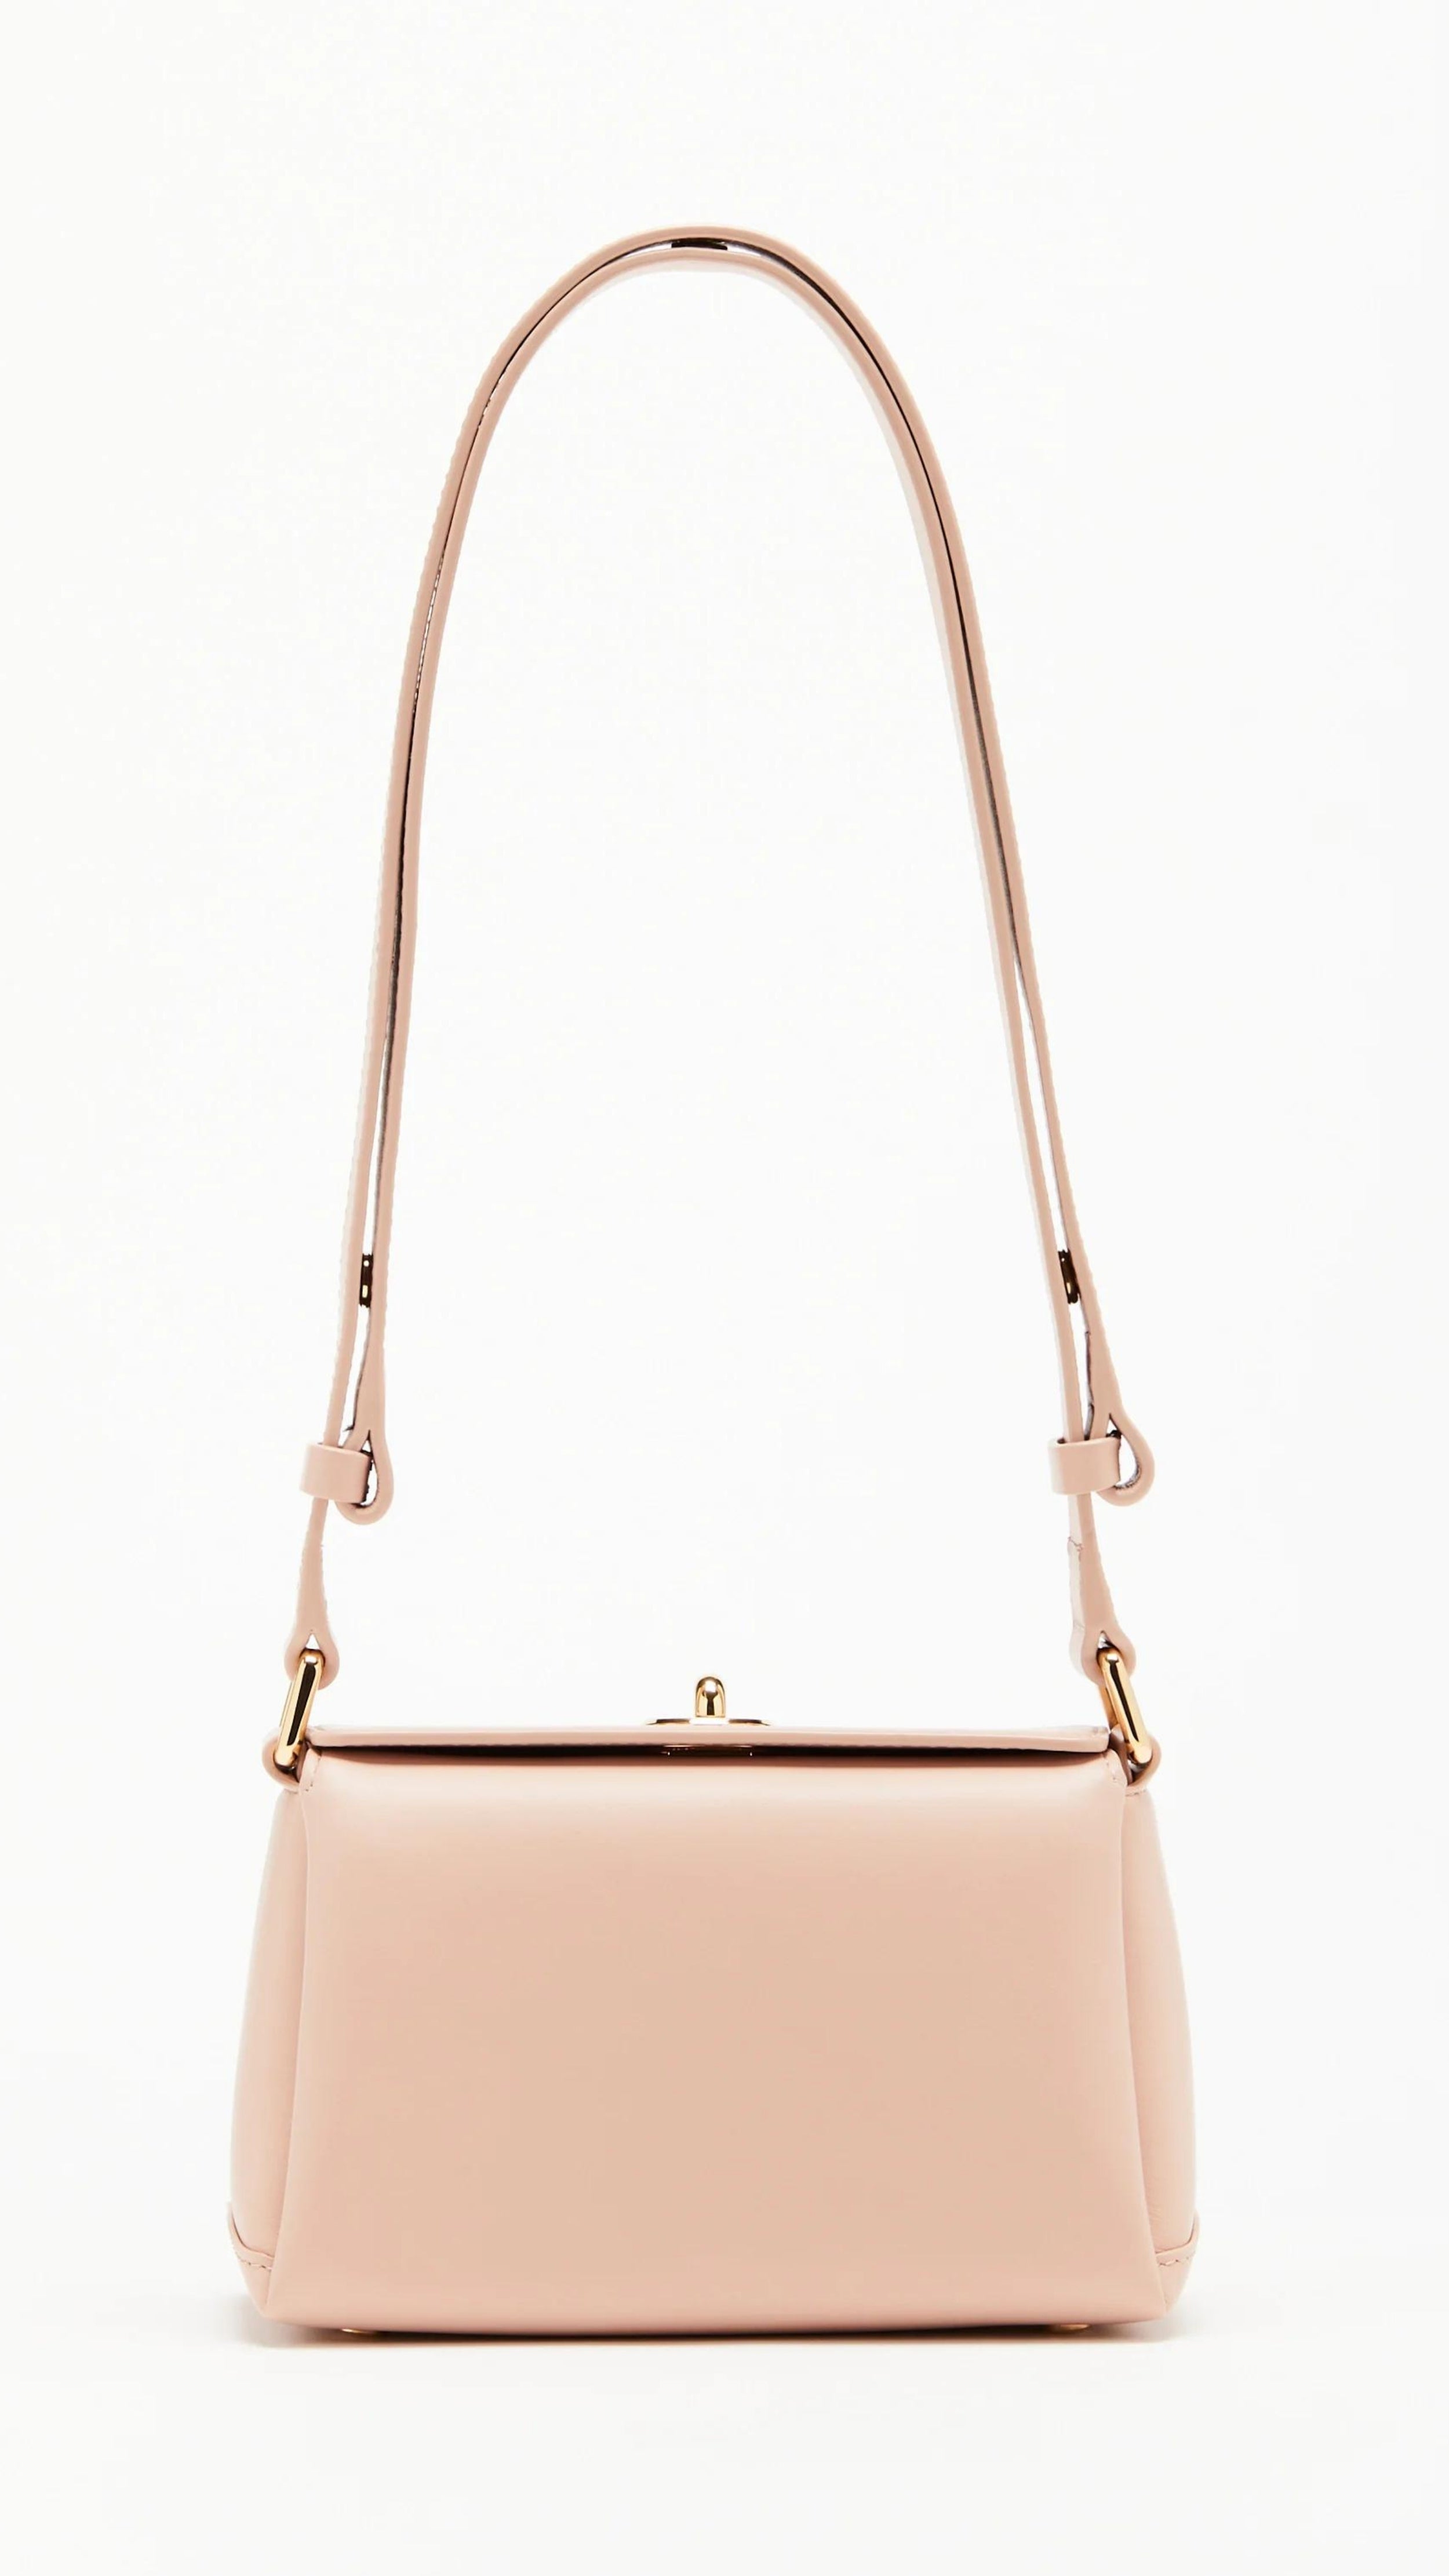 Plan C The Mini Folded Bag in Sand Pink. Luxury handbag crafted in Italy from soft calfskin with an adjustable leather shoulder strap. This purse has a gold-toned turnstile top closure and offers three compartments, one flat zipped and one snap buttoned pocket. Photo shown from the front view with the adjustable strap.